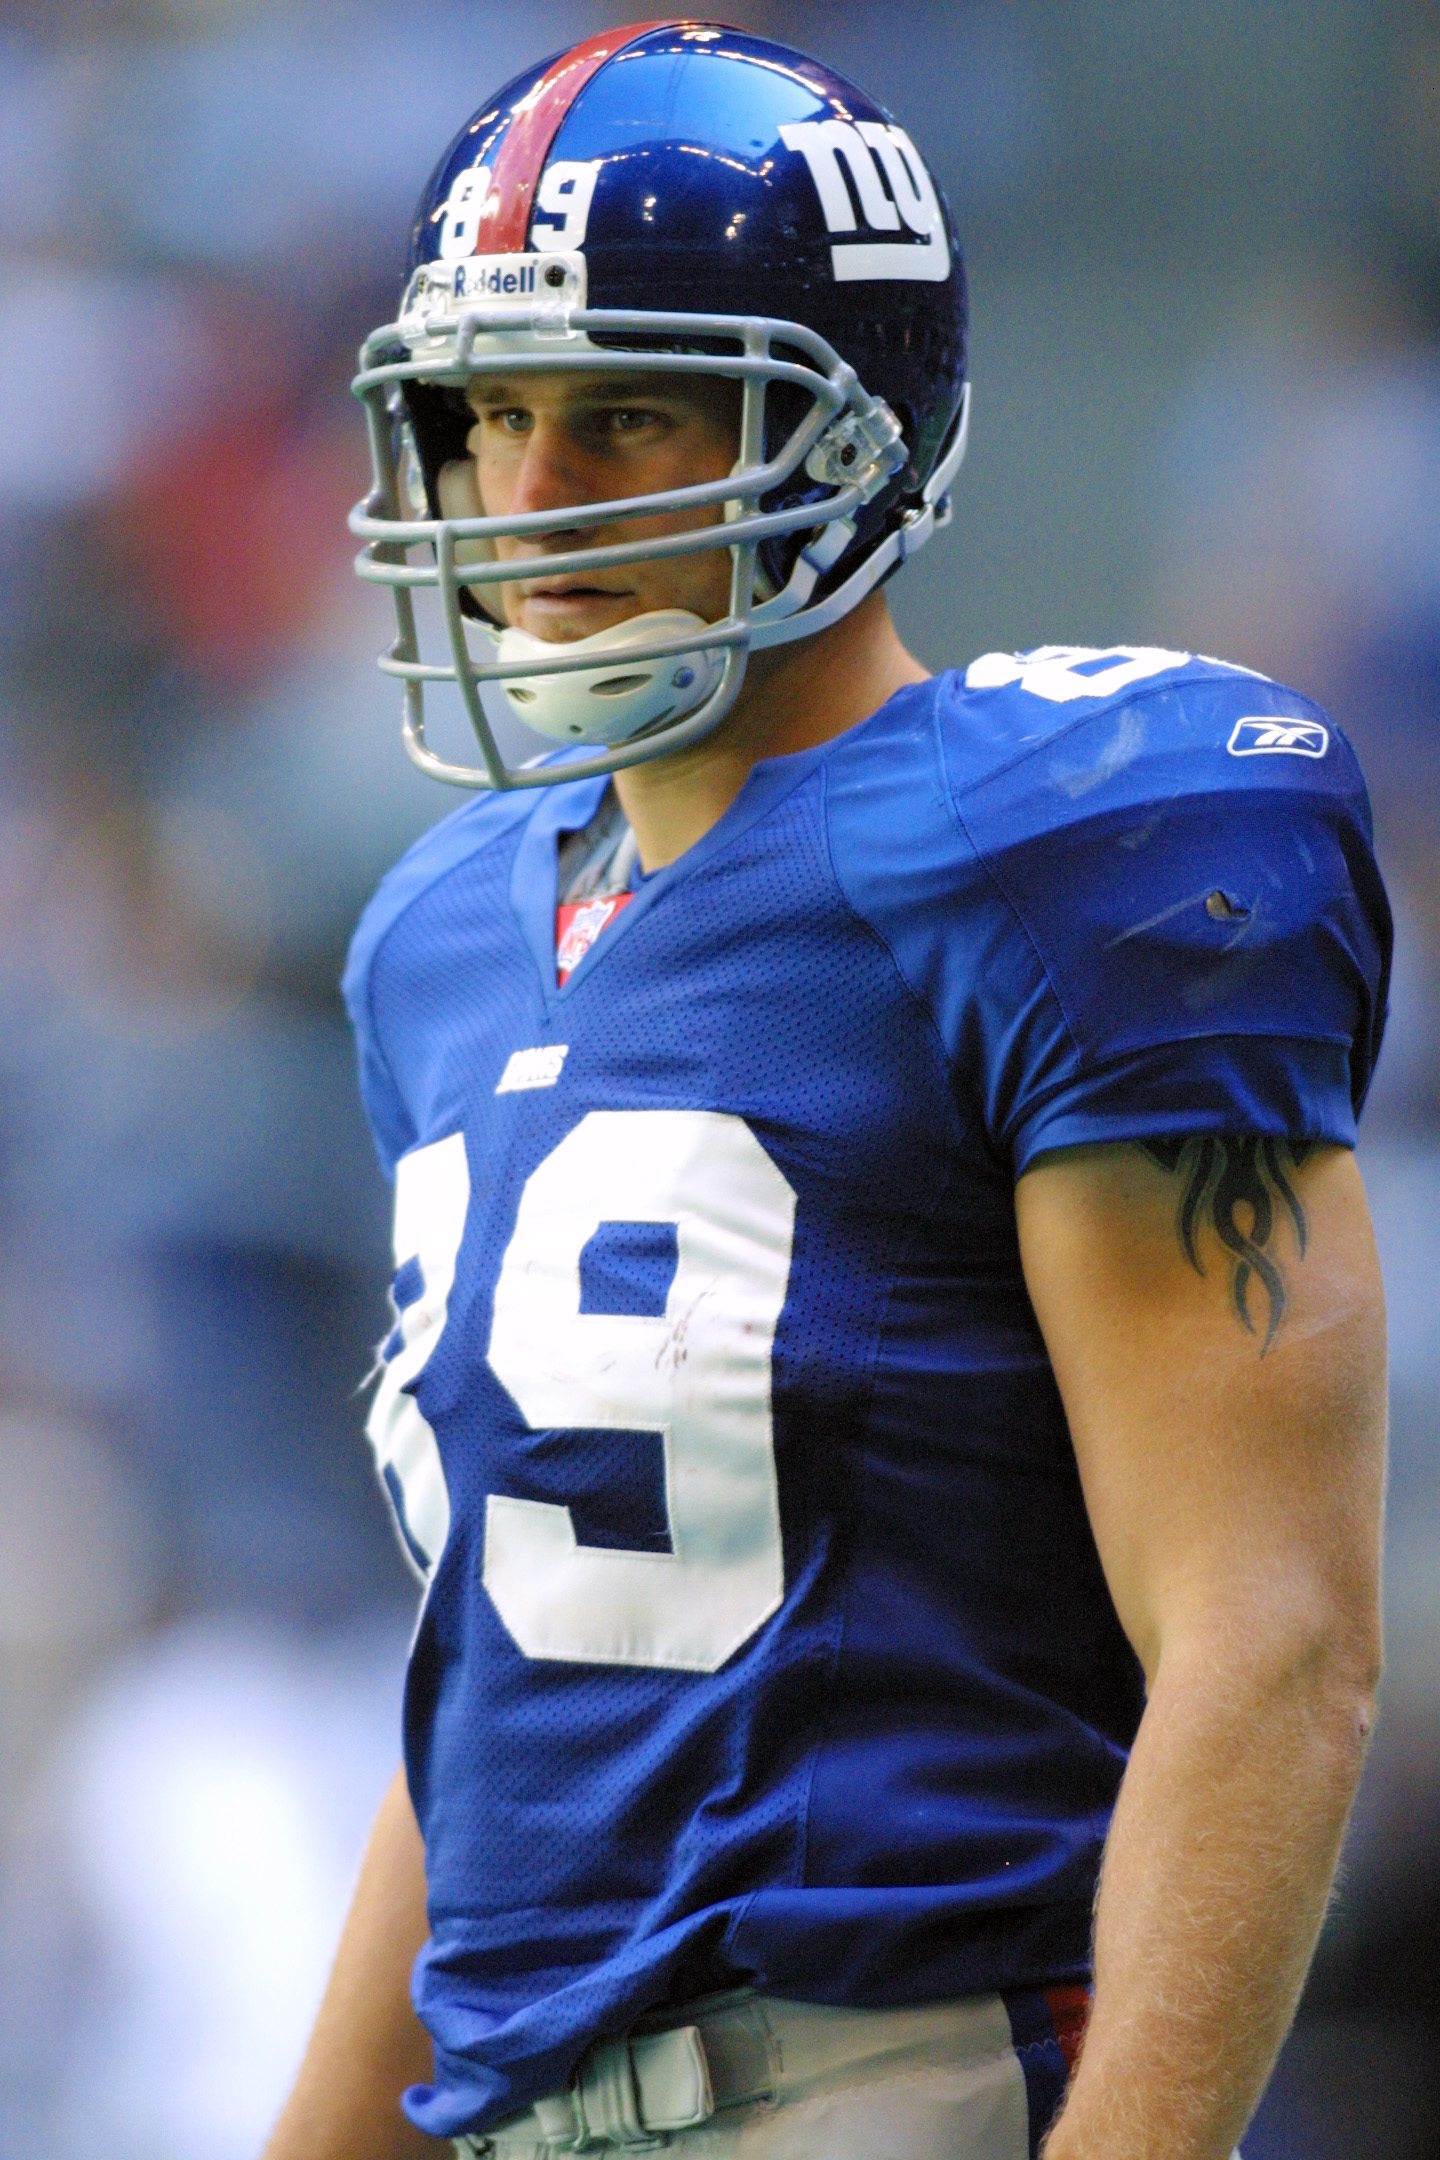 Campbell started his playing career with the Giants. (Getty)